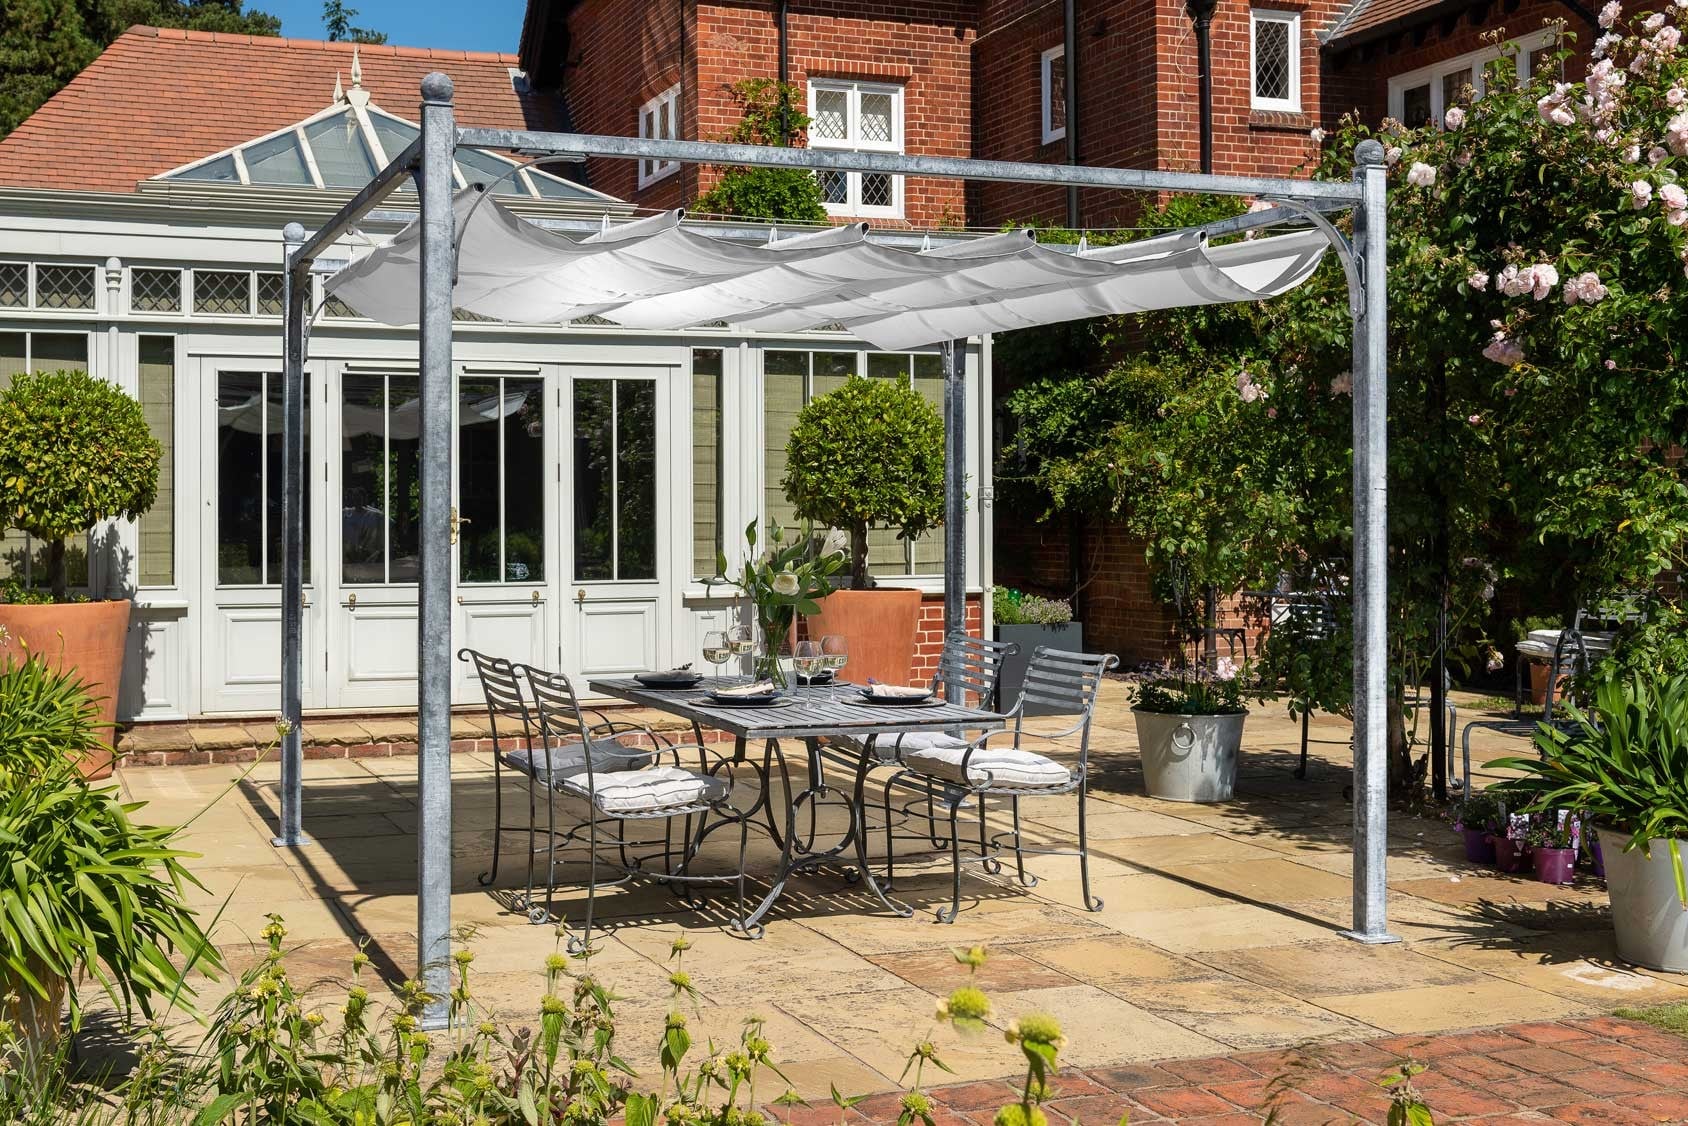 Traditional Pergola with Awning or Wire Grid Roof - The Southwold Collection by Harrod Horticultural